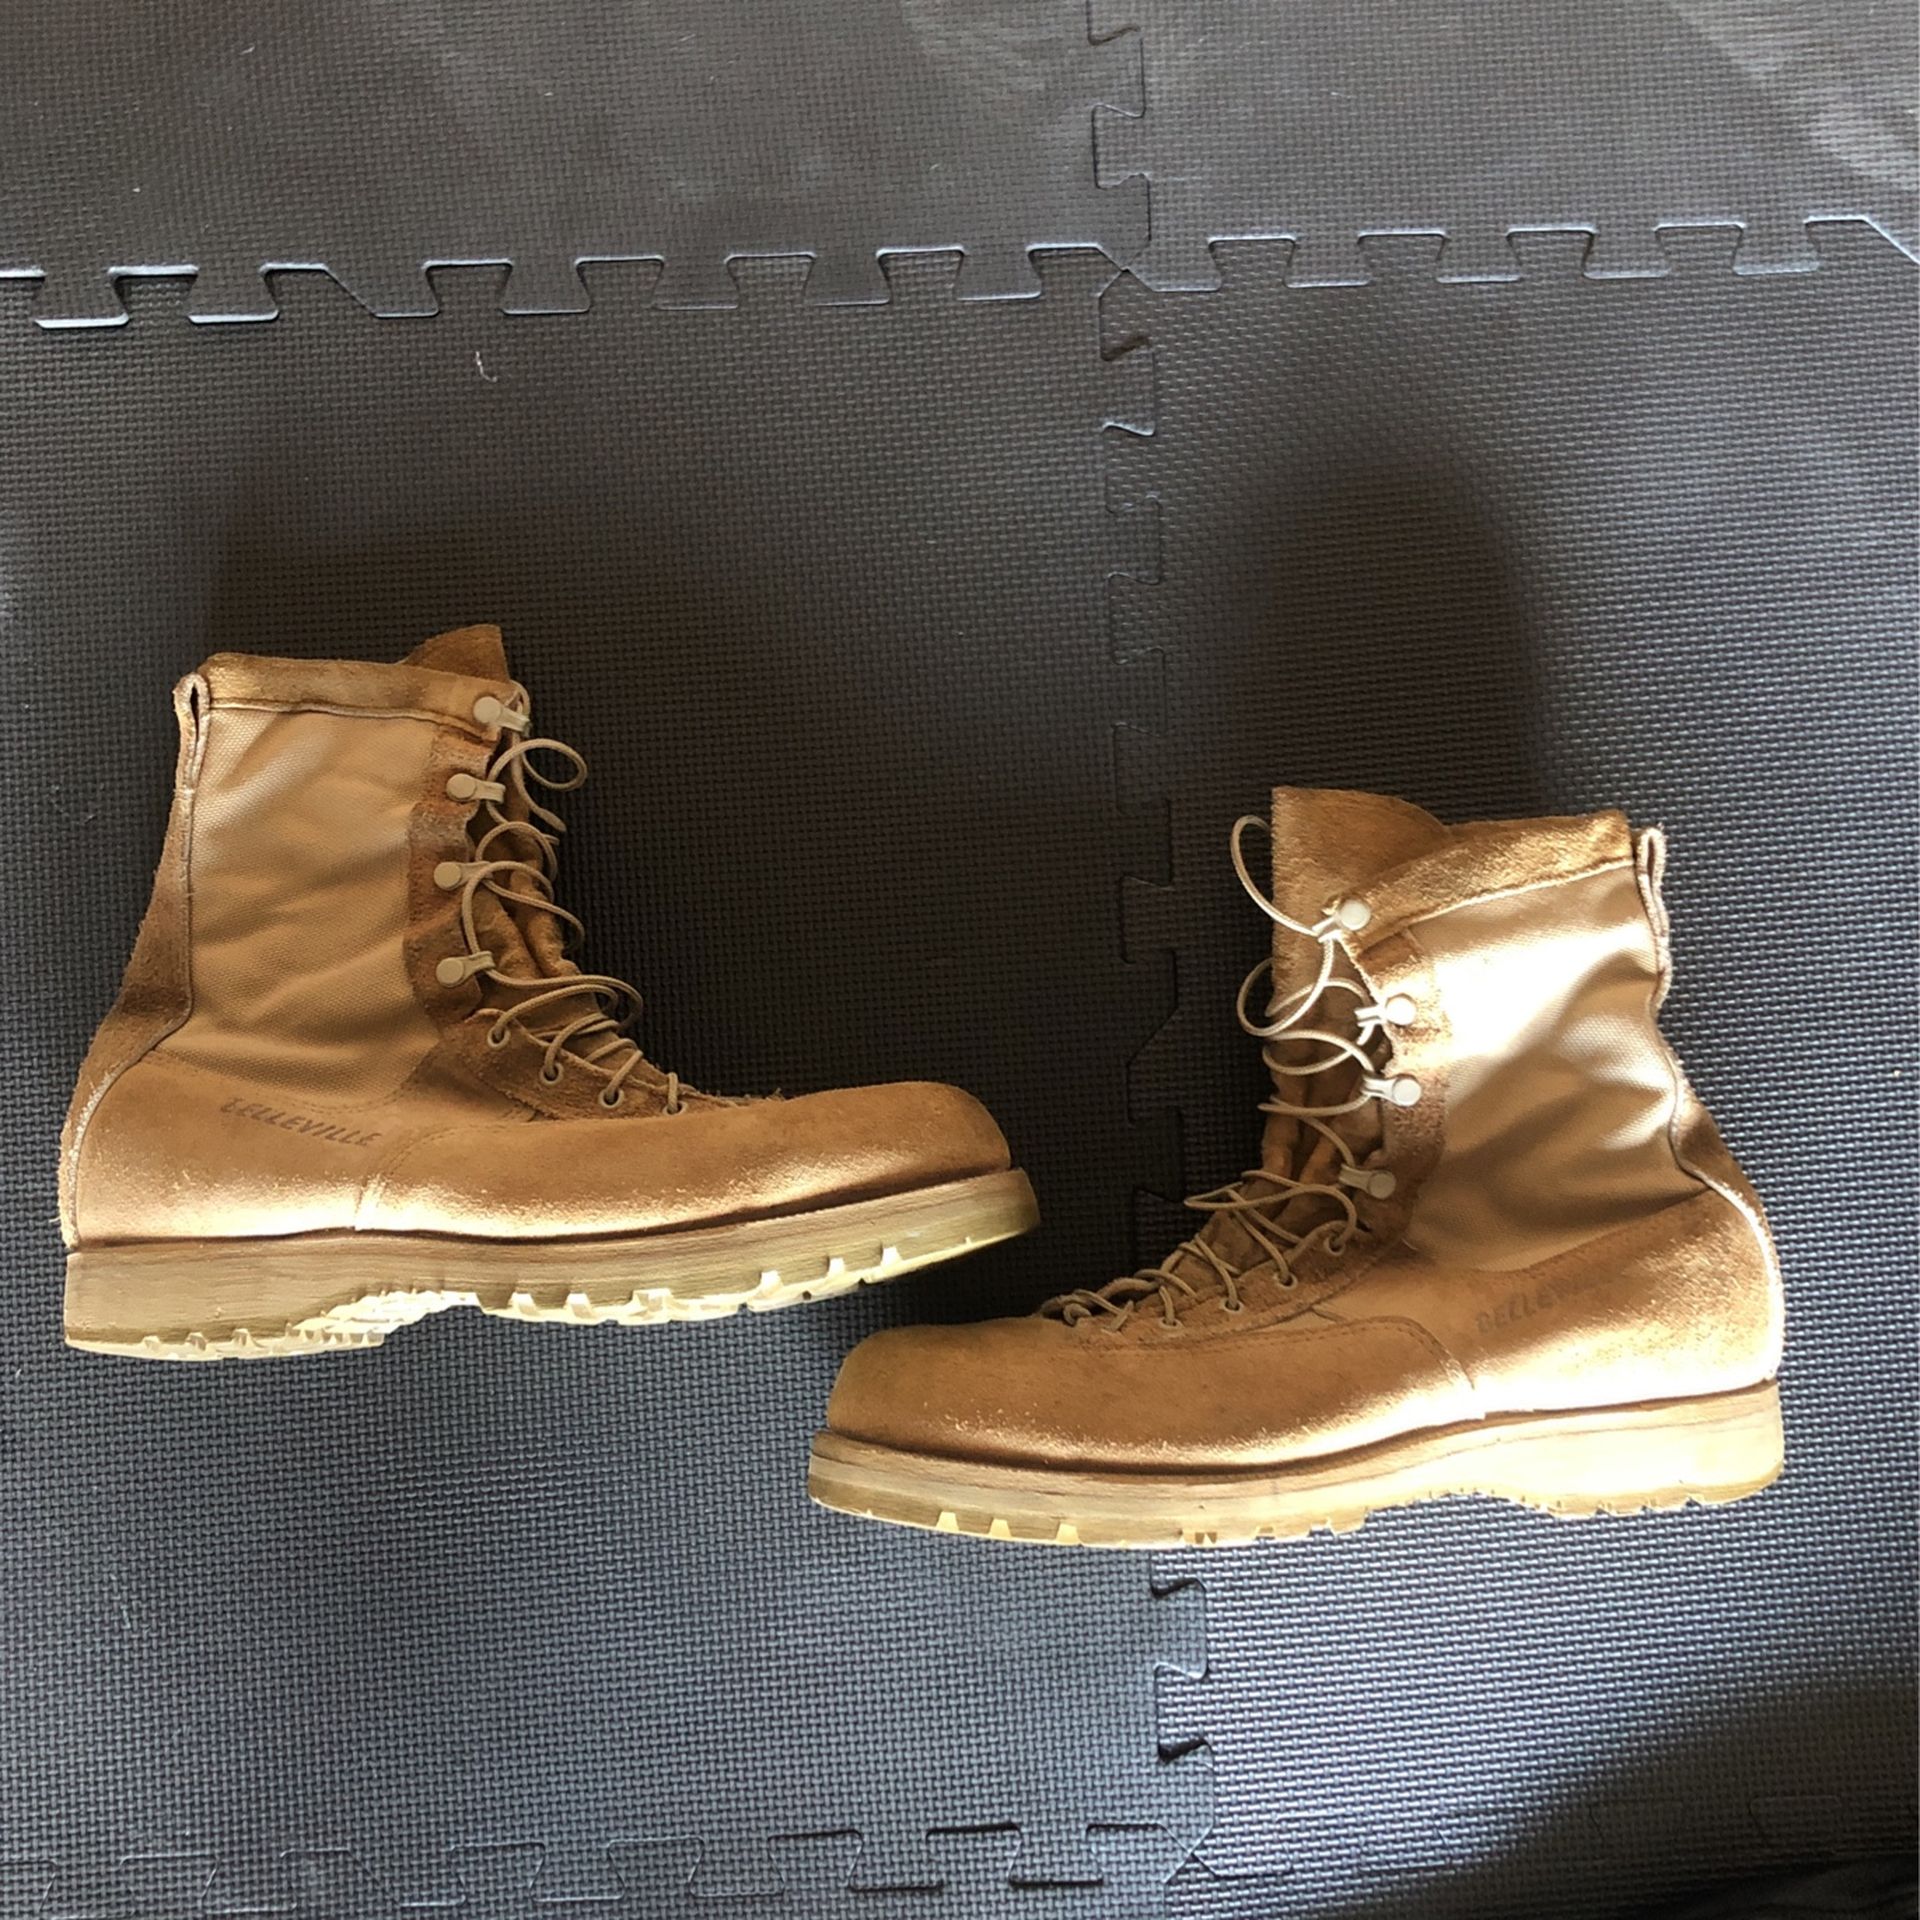 Steel Toe Size 12.5 Belleville Army Military Boots Goretex 